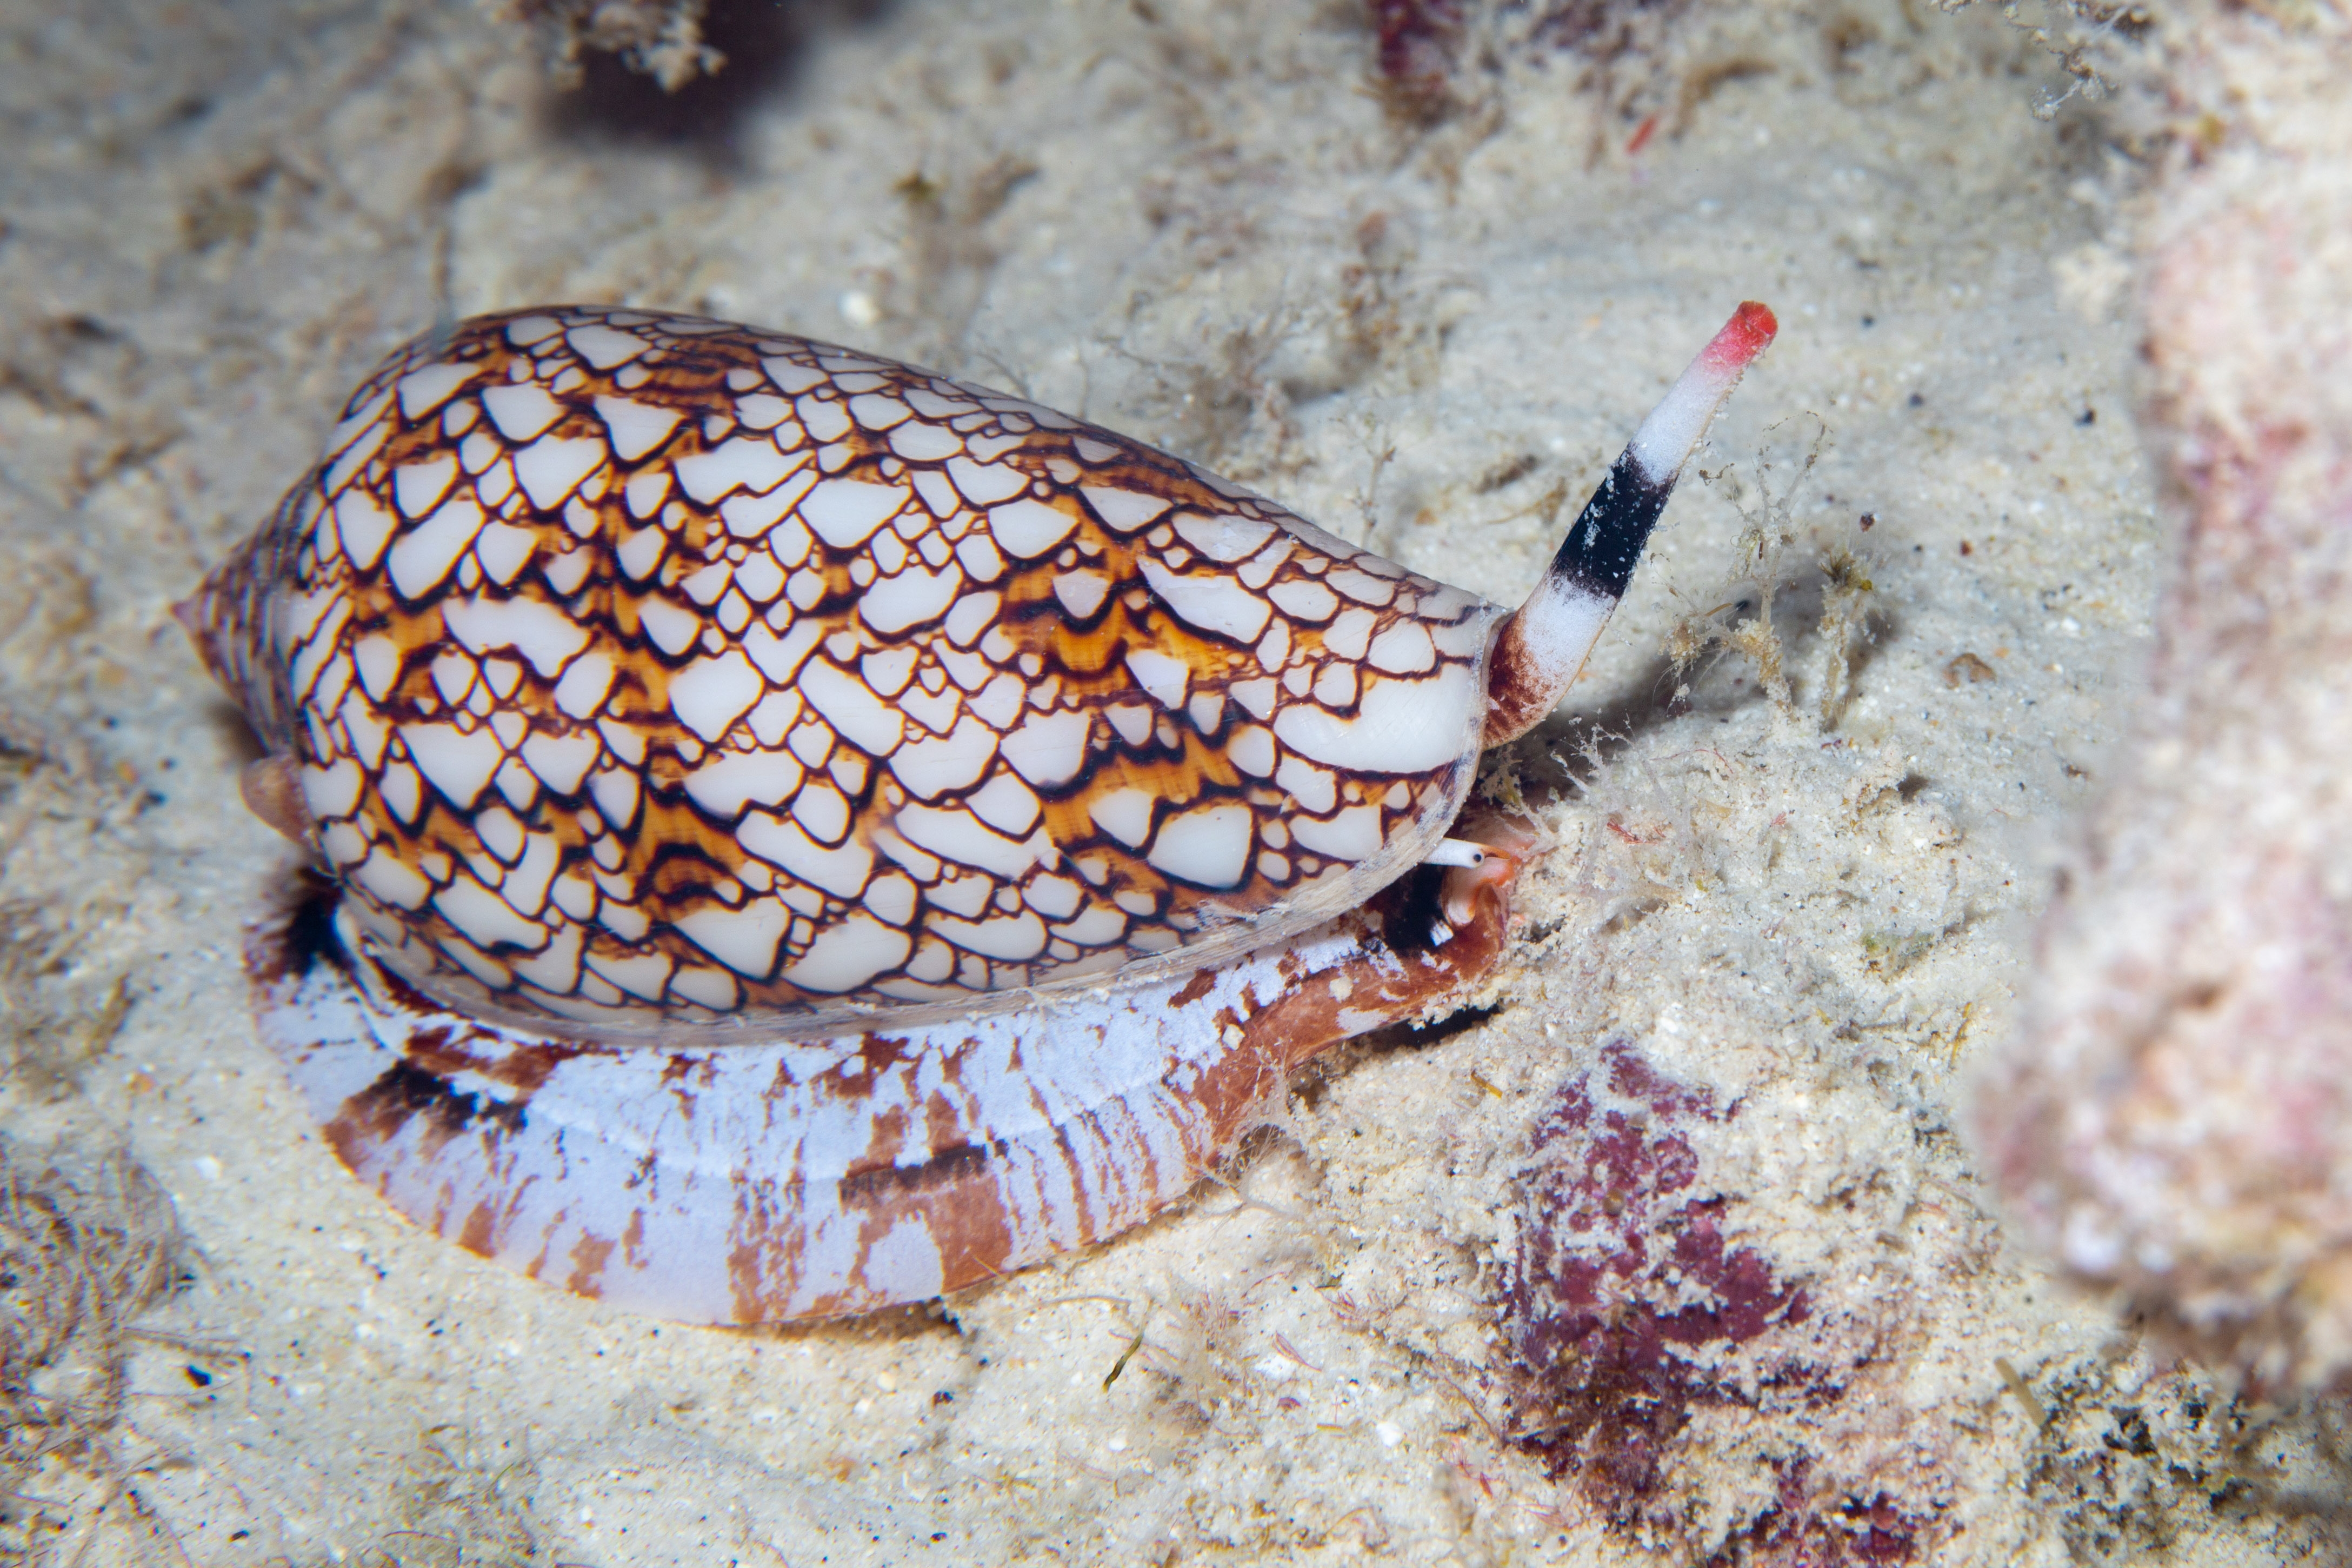 An image of the cone snail whose venom will be studied in new research from Dr Andrew Jamieson